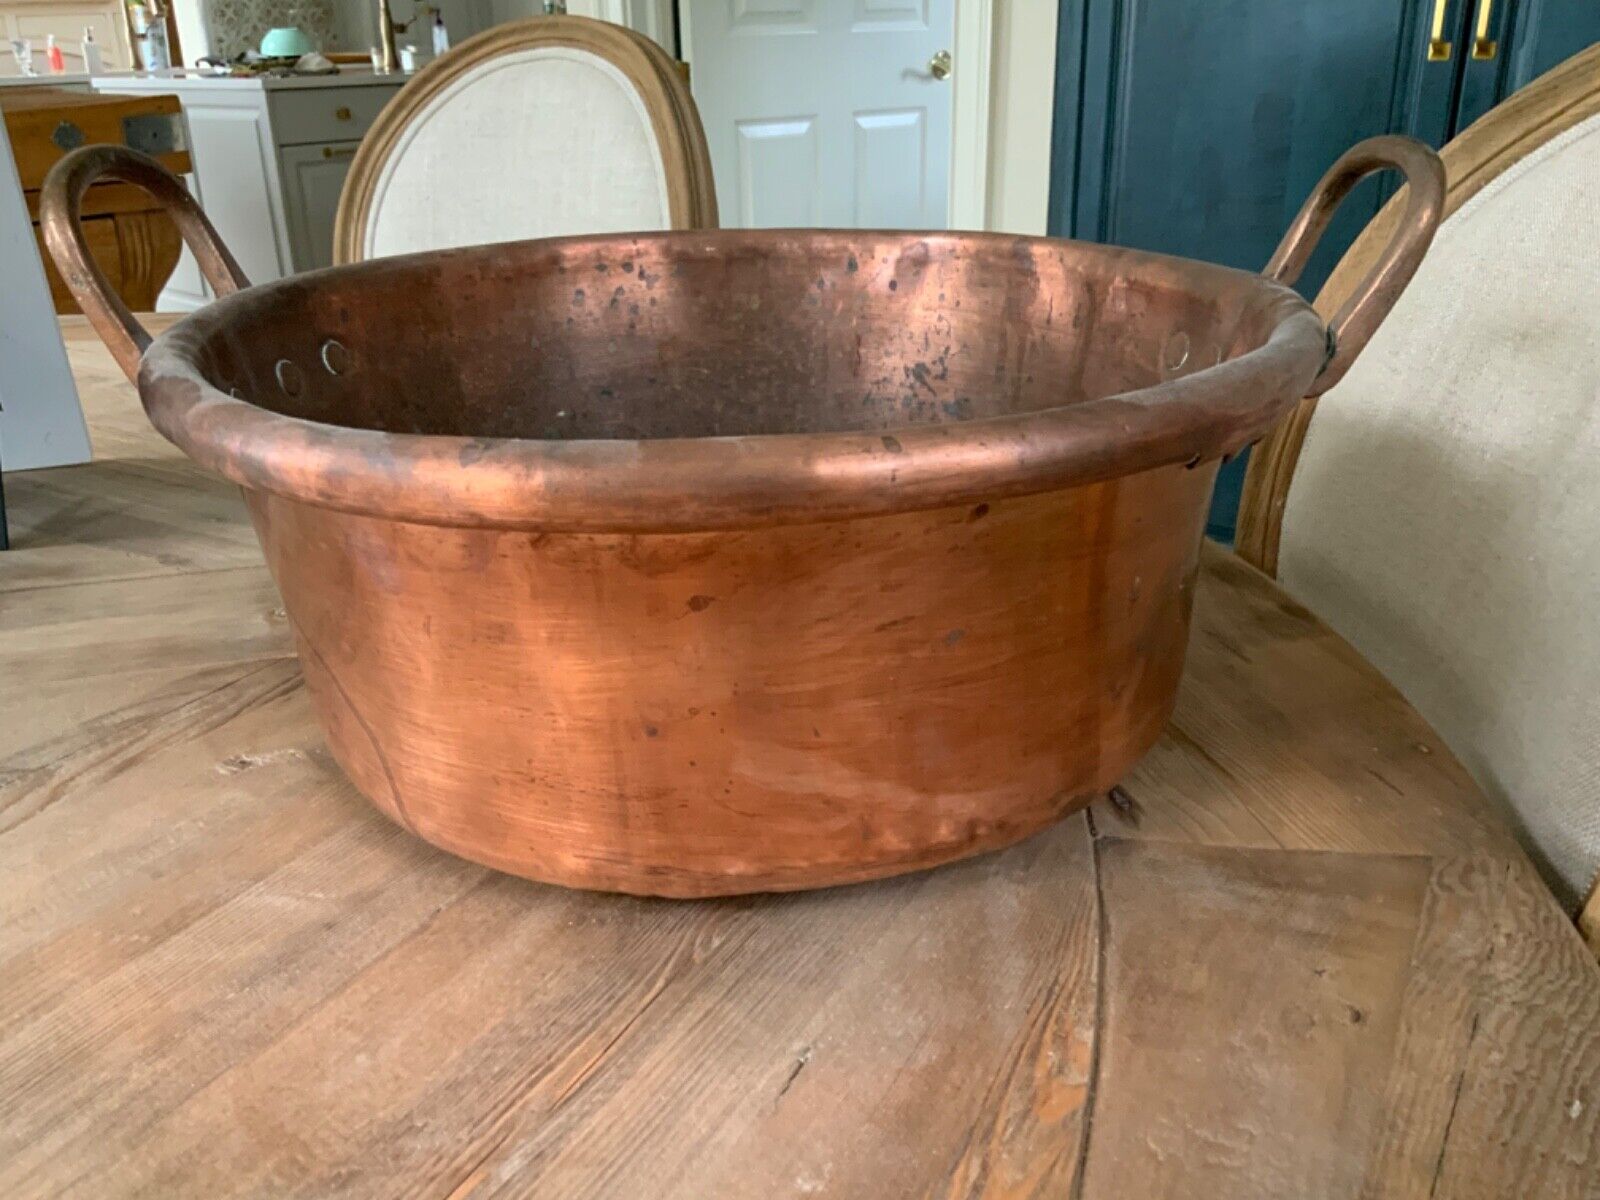 VINTAGE FRENCH COPPER Confiture or Confectioners PAN,c.1930-50s,HUGE